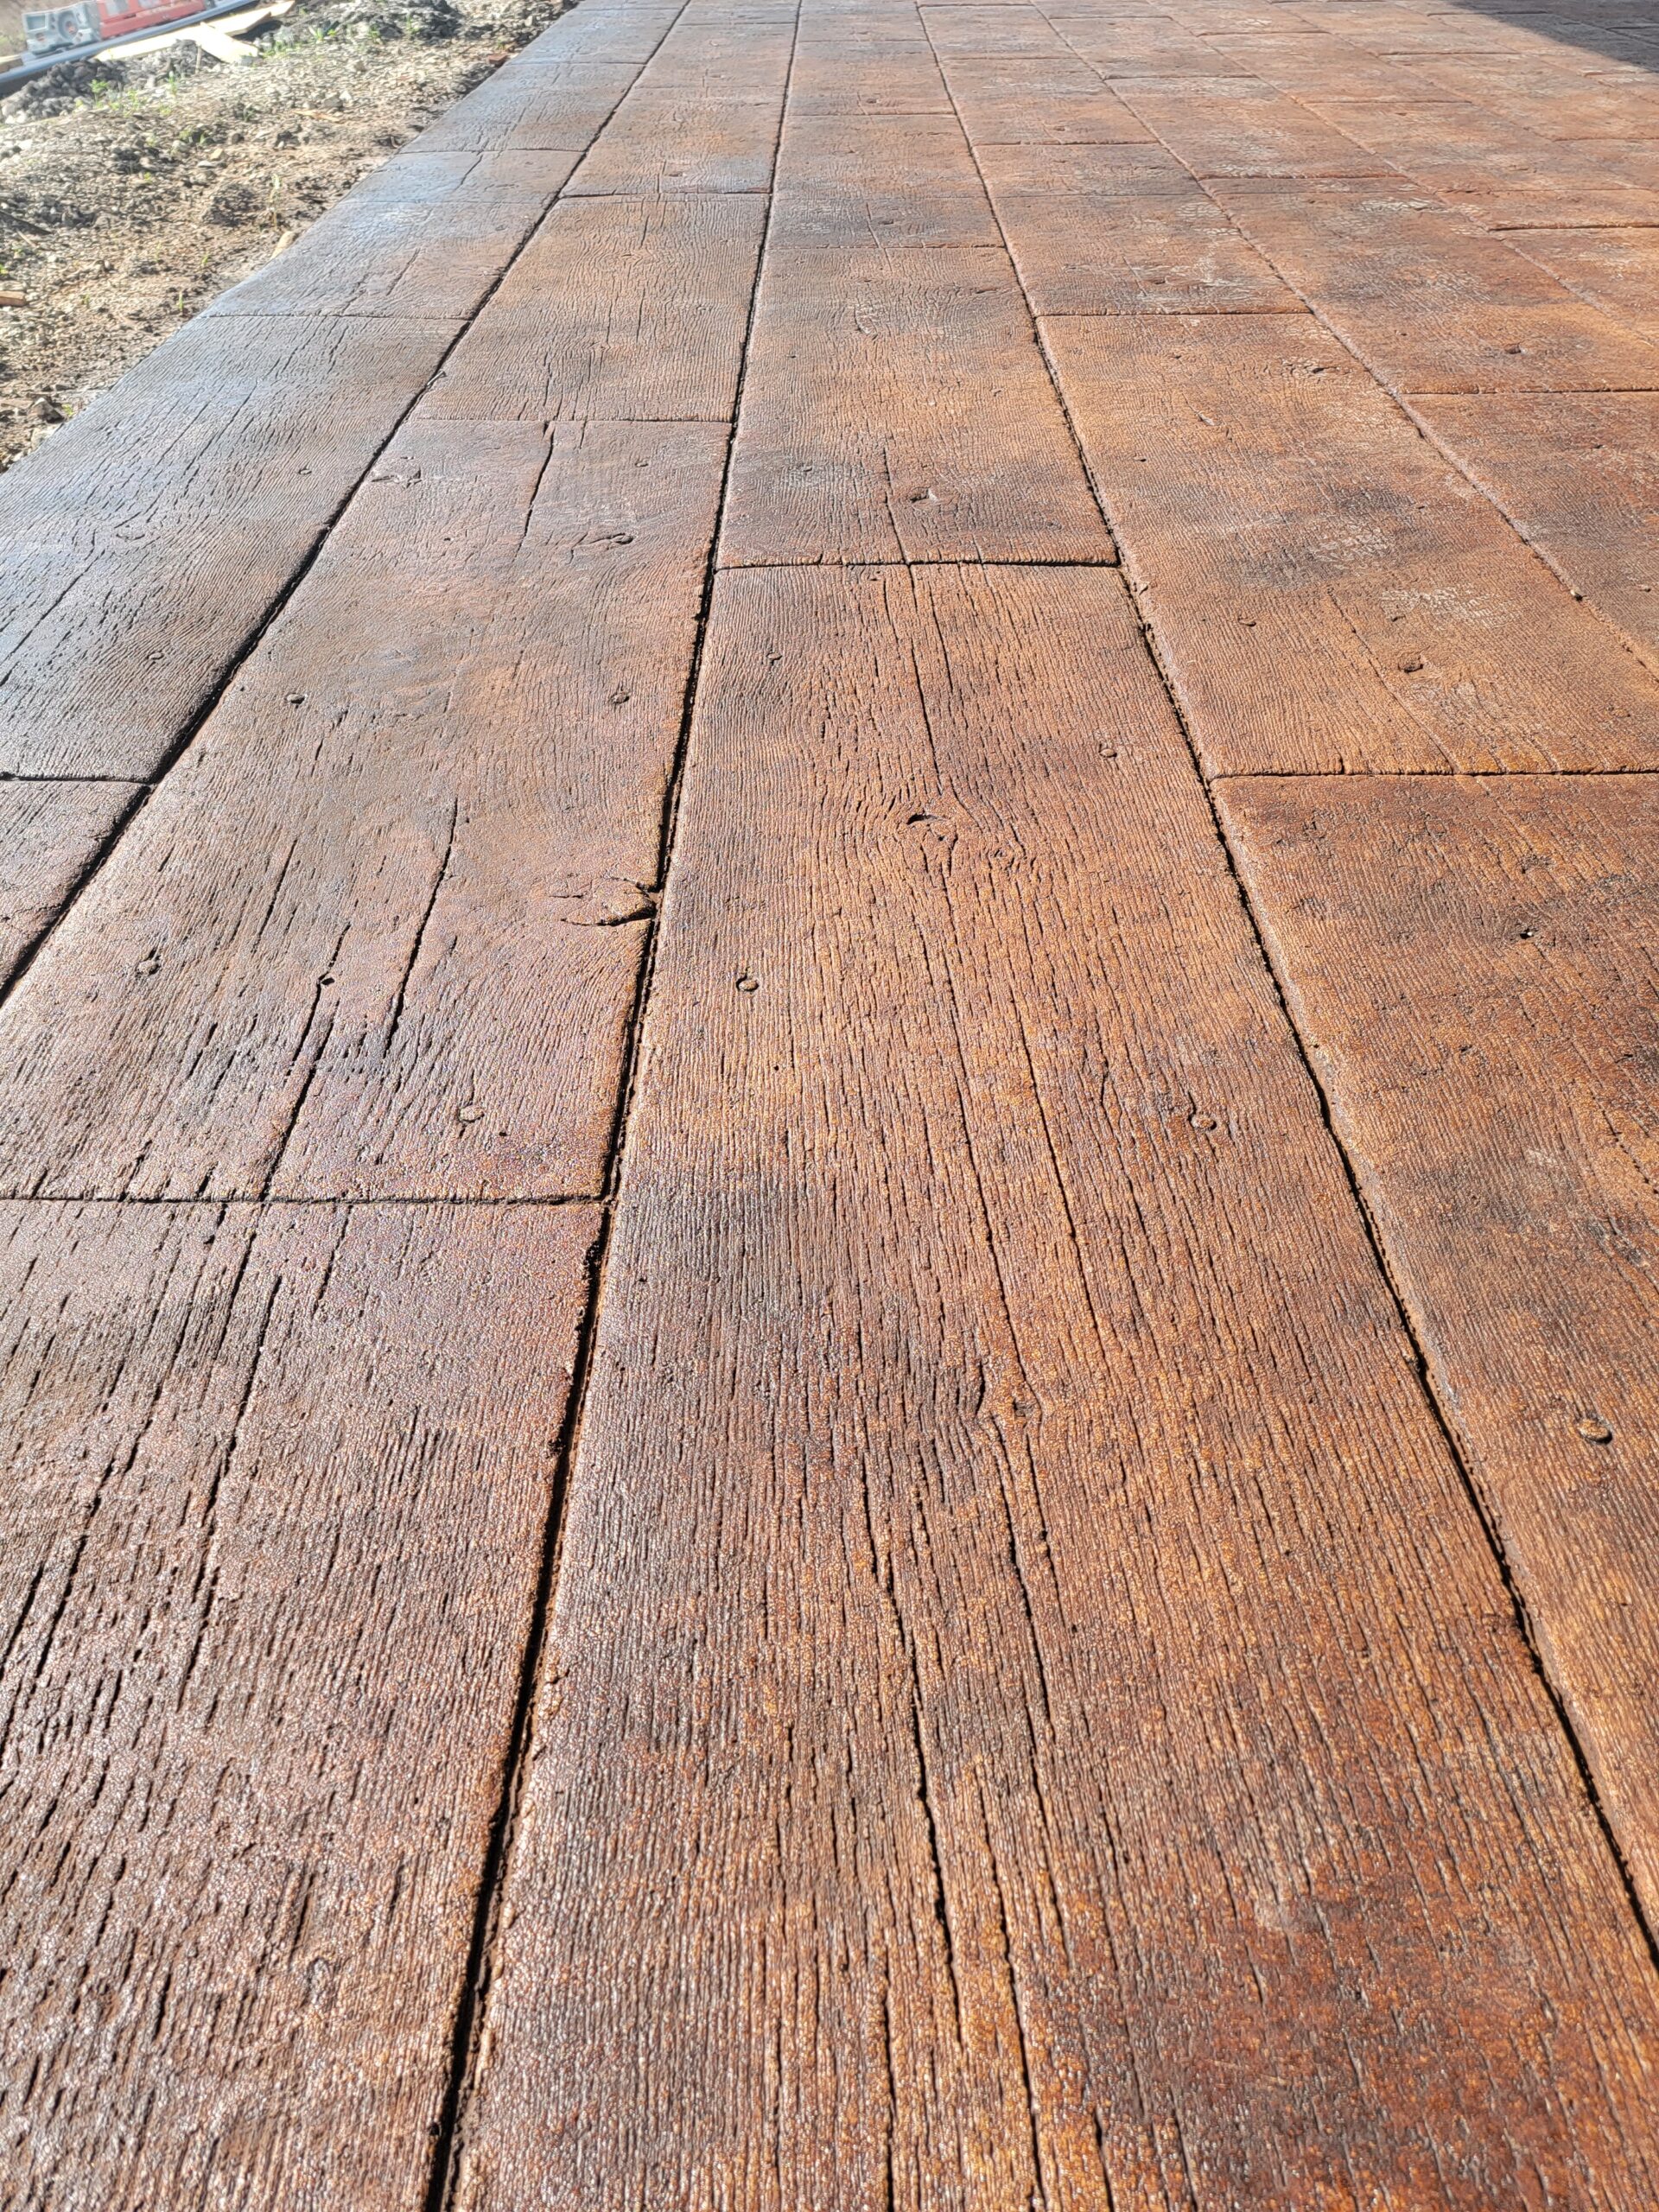 Finished and sealed faux wood-stamped concrete patio, displaying a realistic wood look